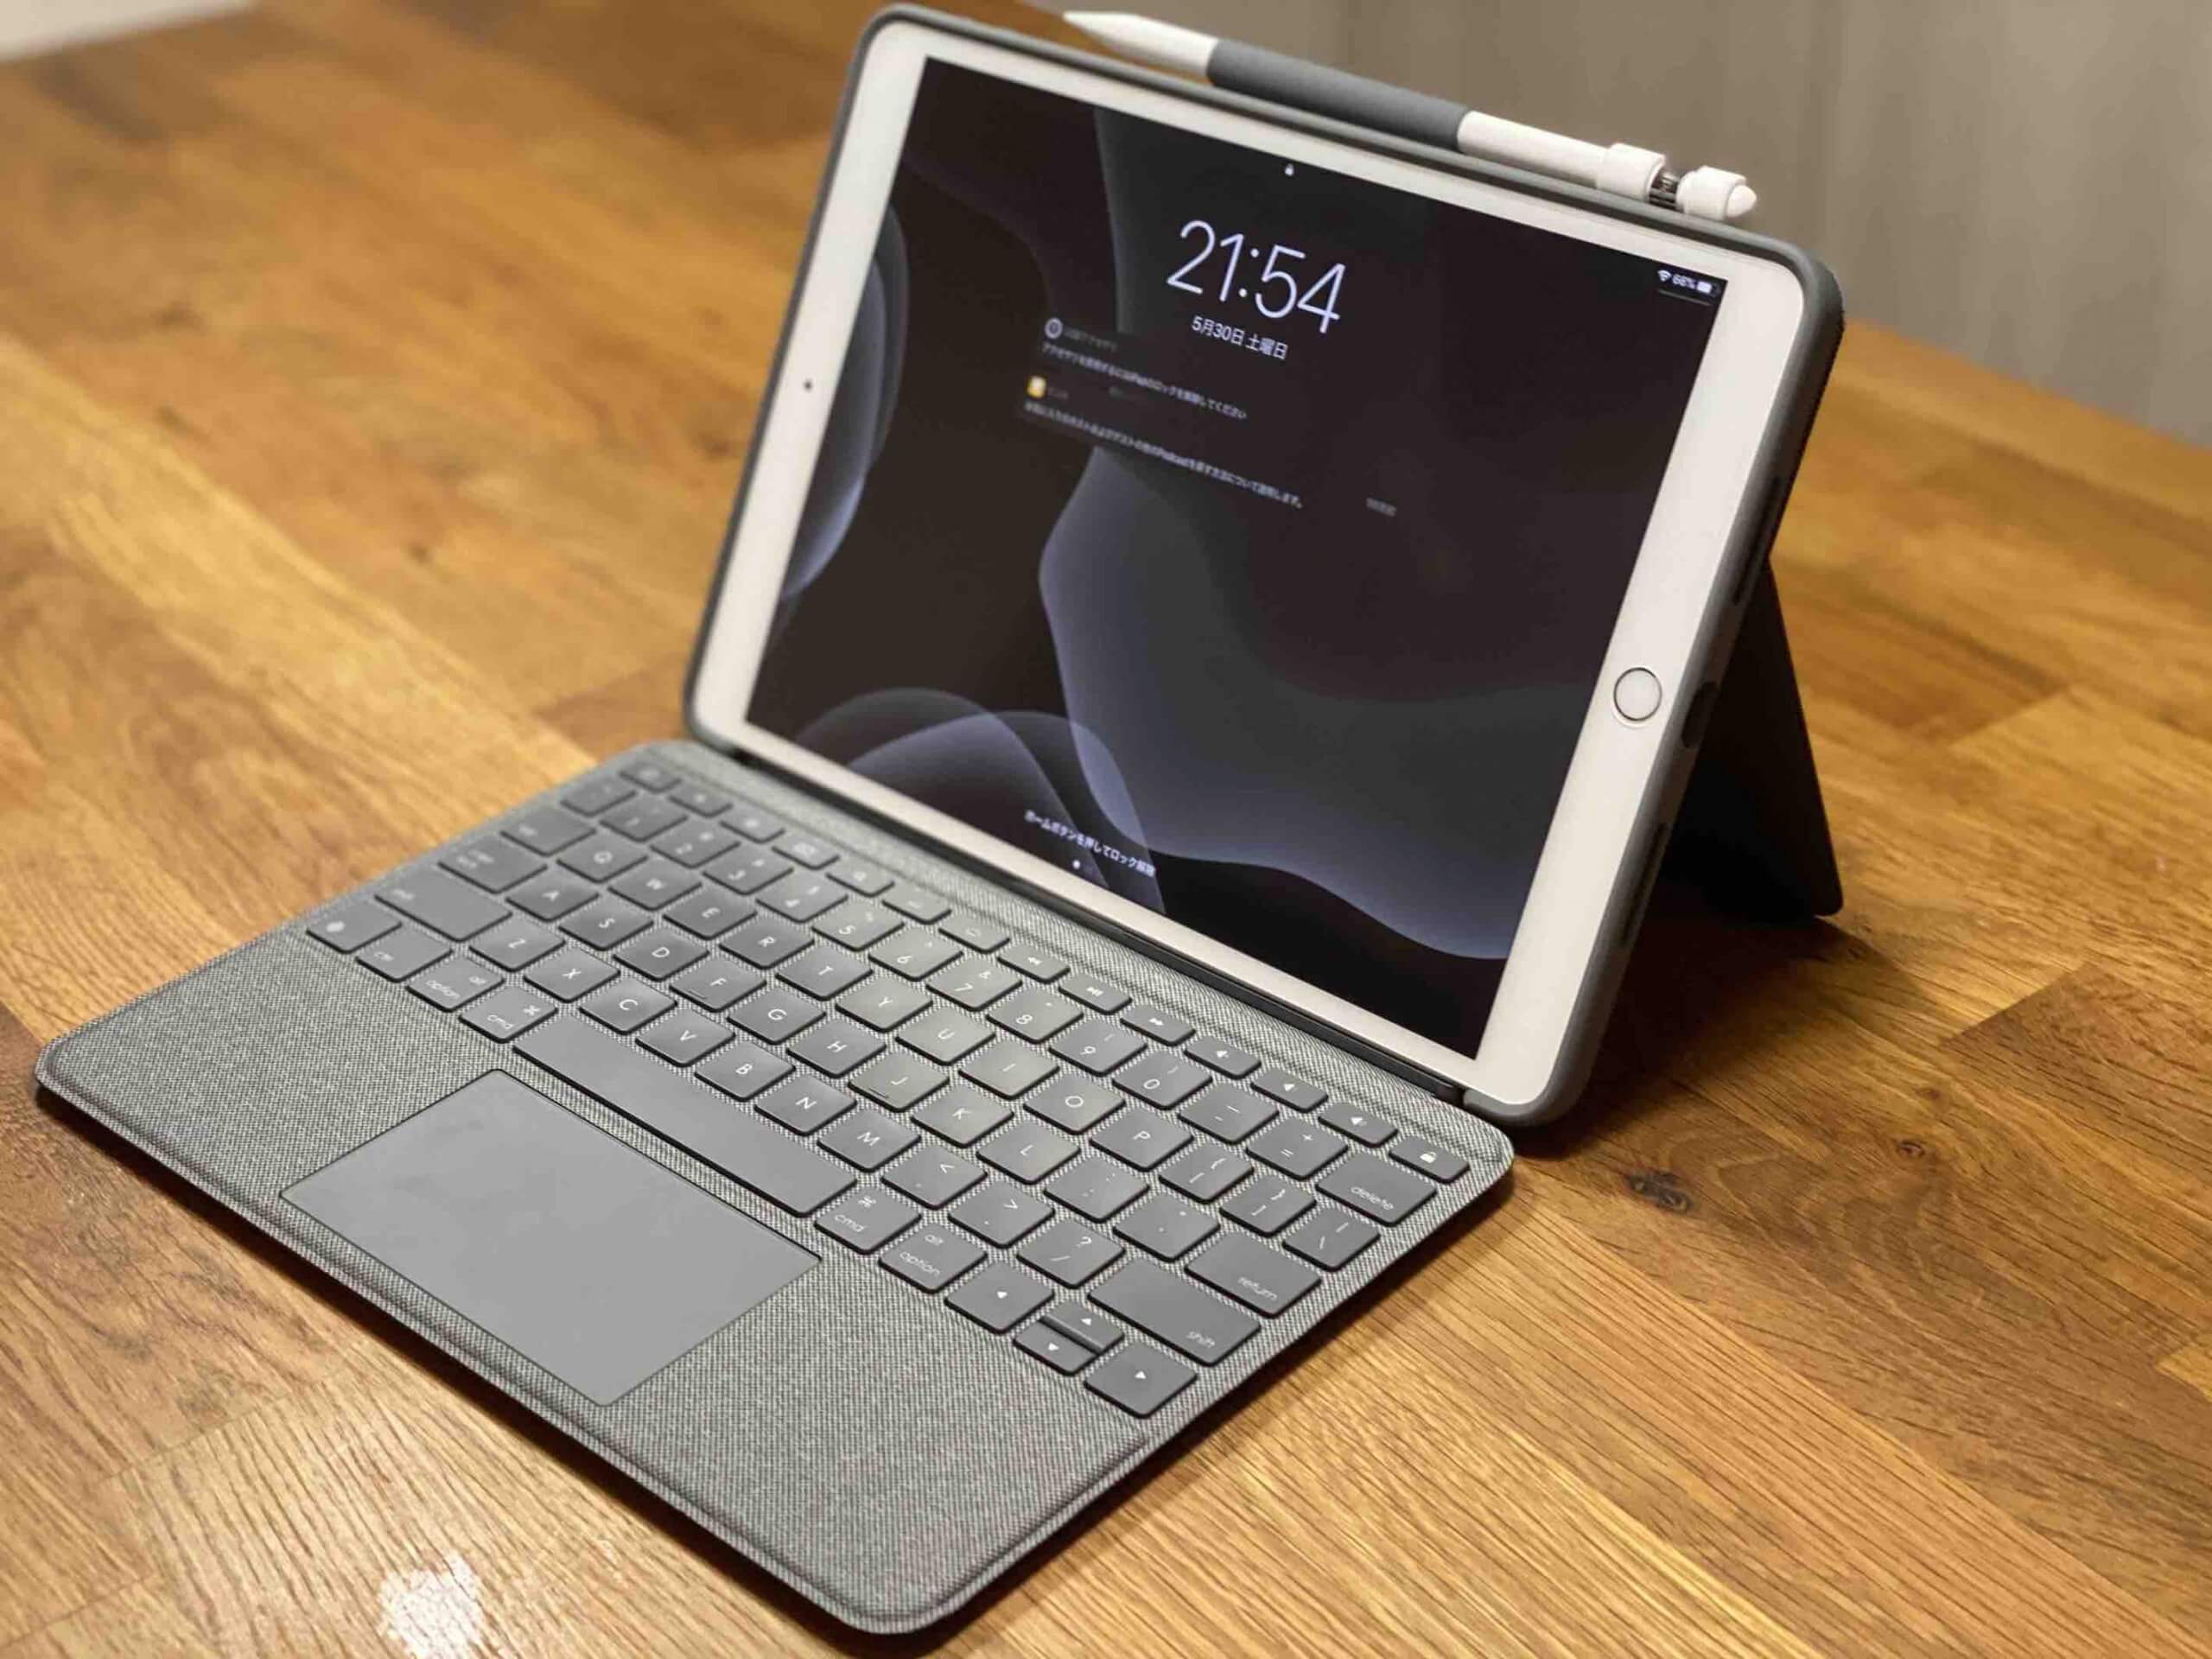 iPad Airをノートパソコン化！Logicool Combo Touch Keyboard Case 